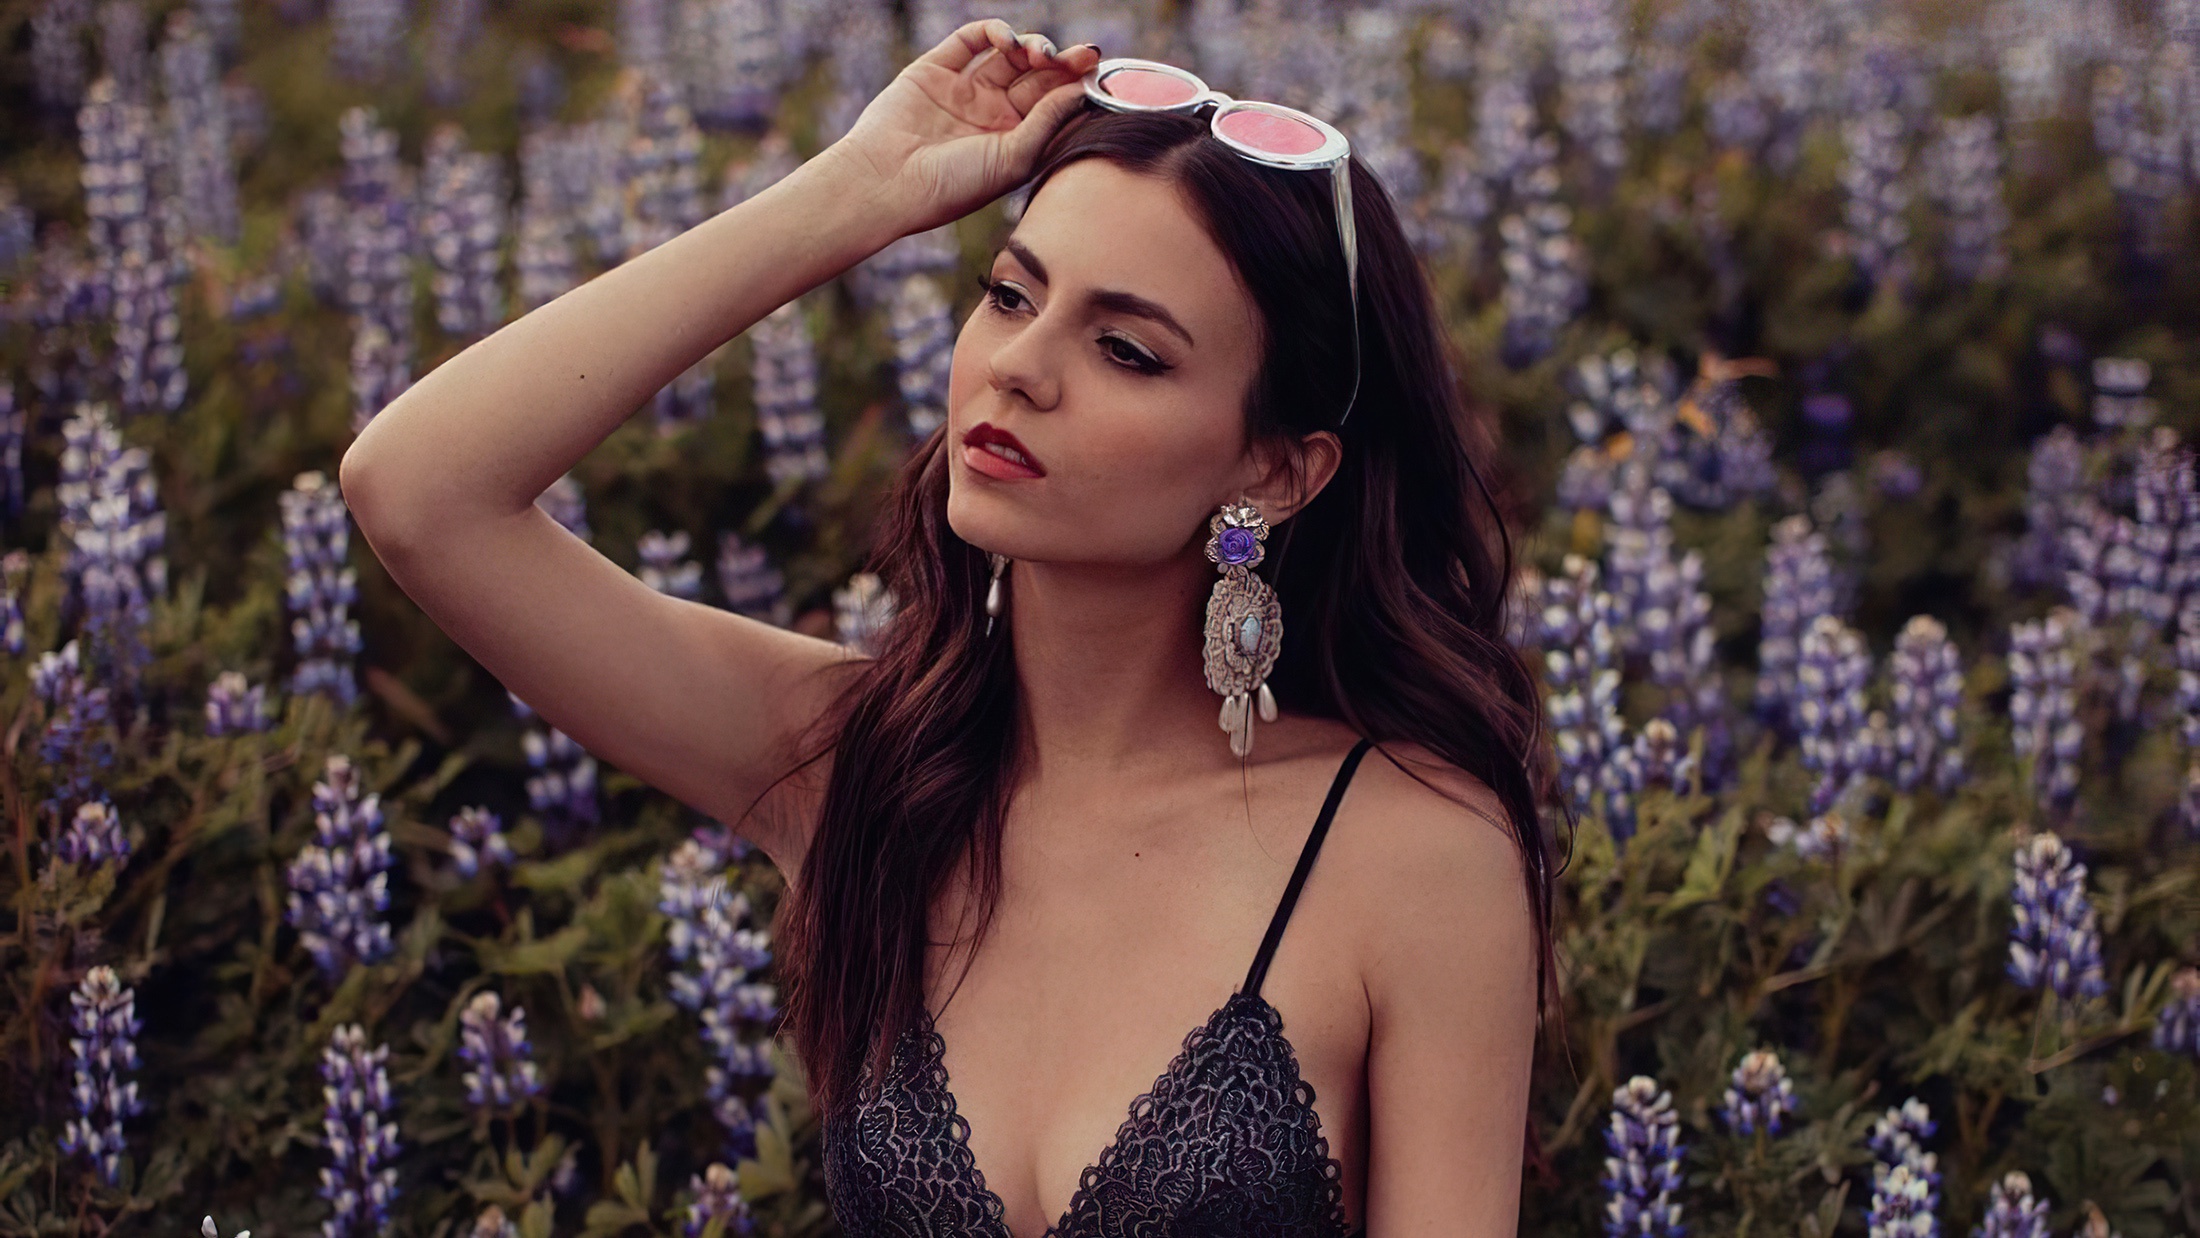 Earrings Flower Lupine Model Sunglasses Victoria Justice 2200x1238